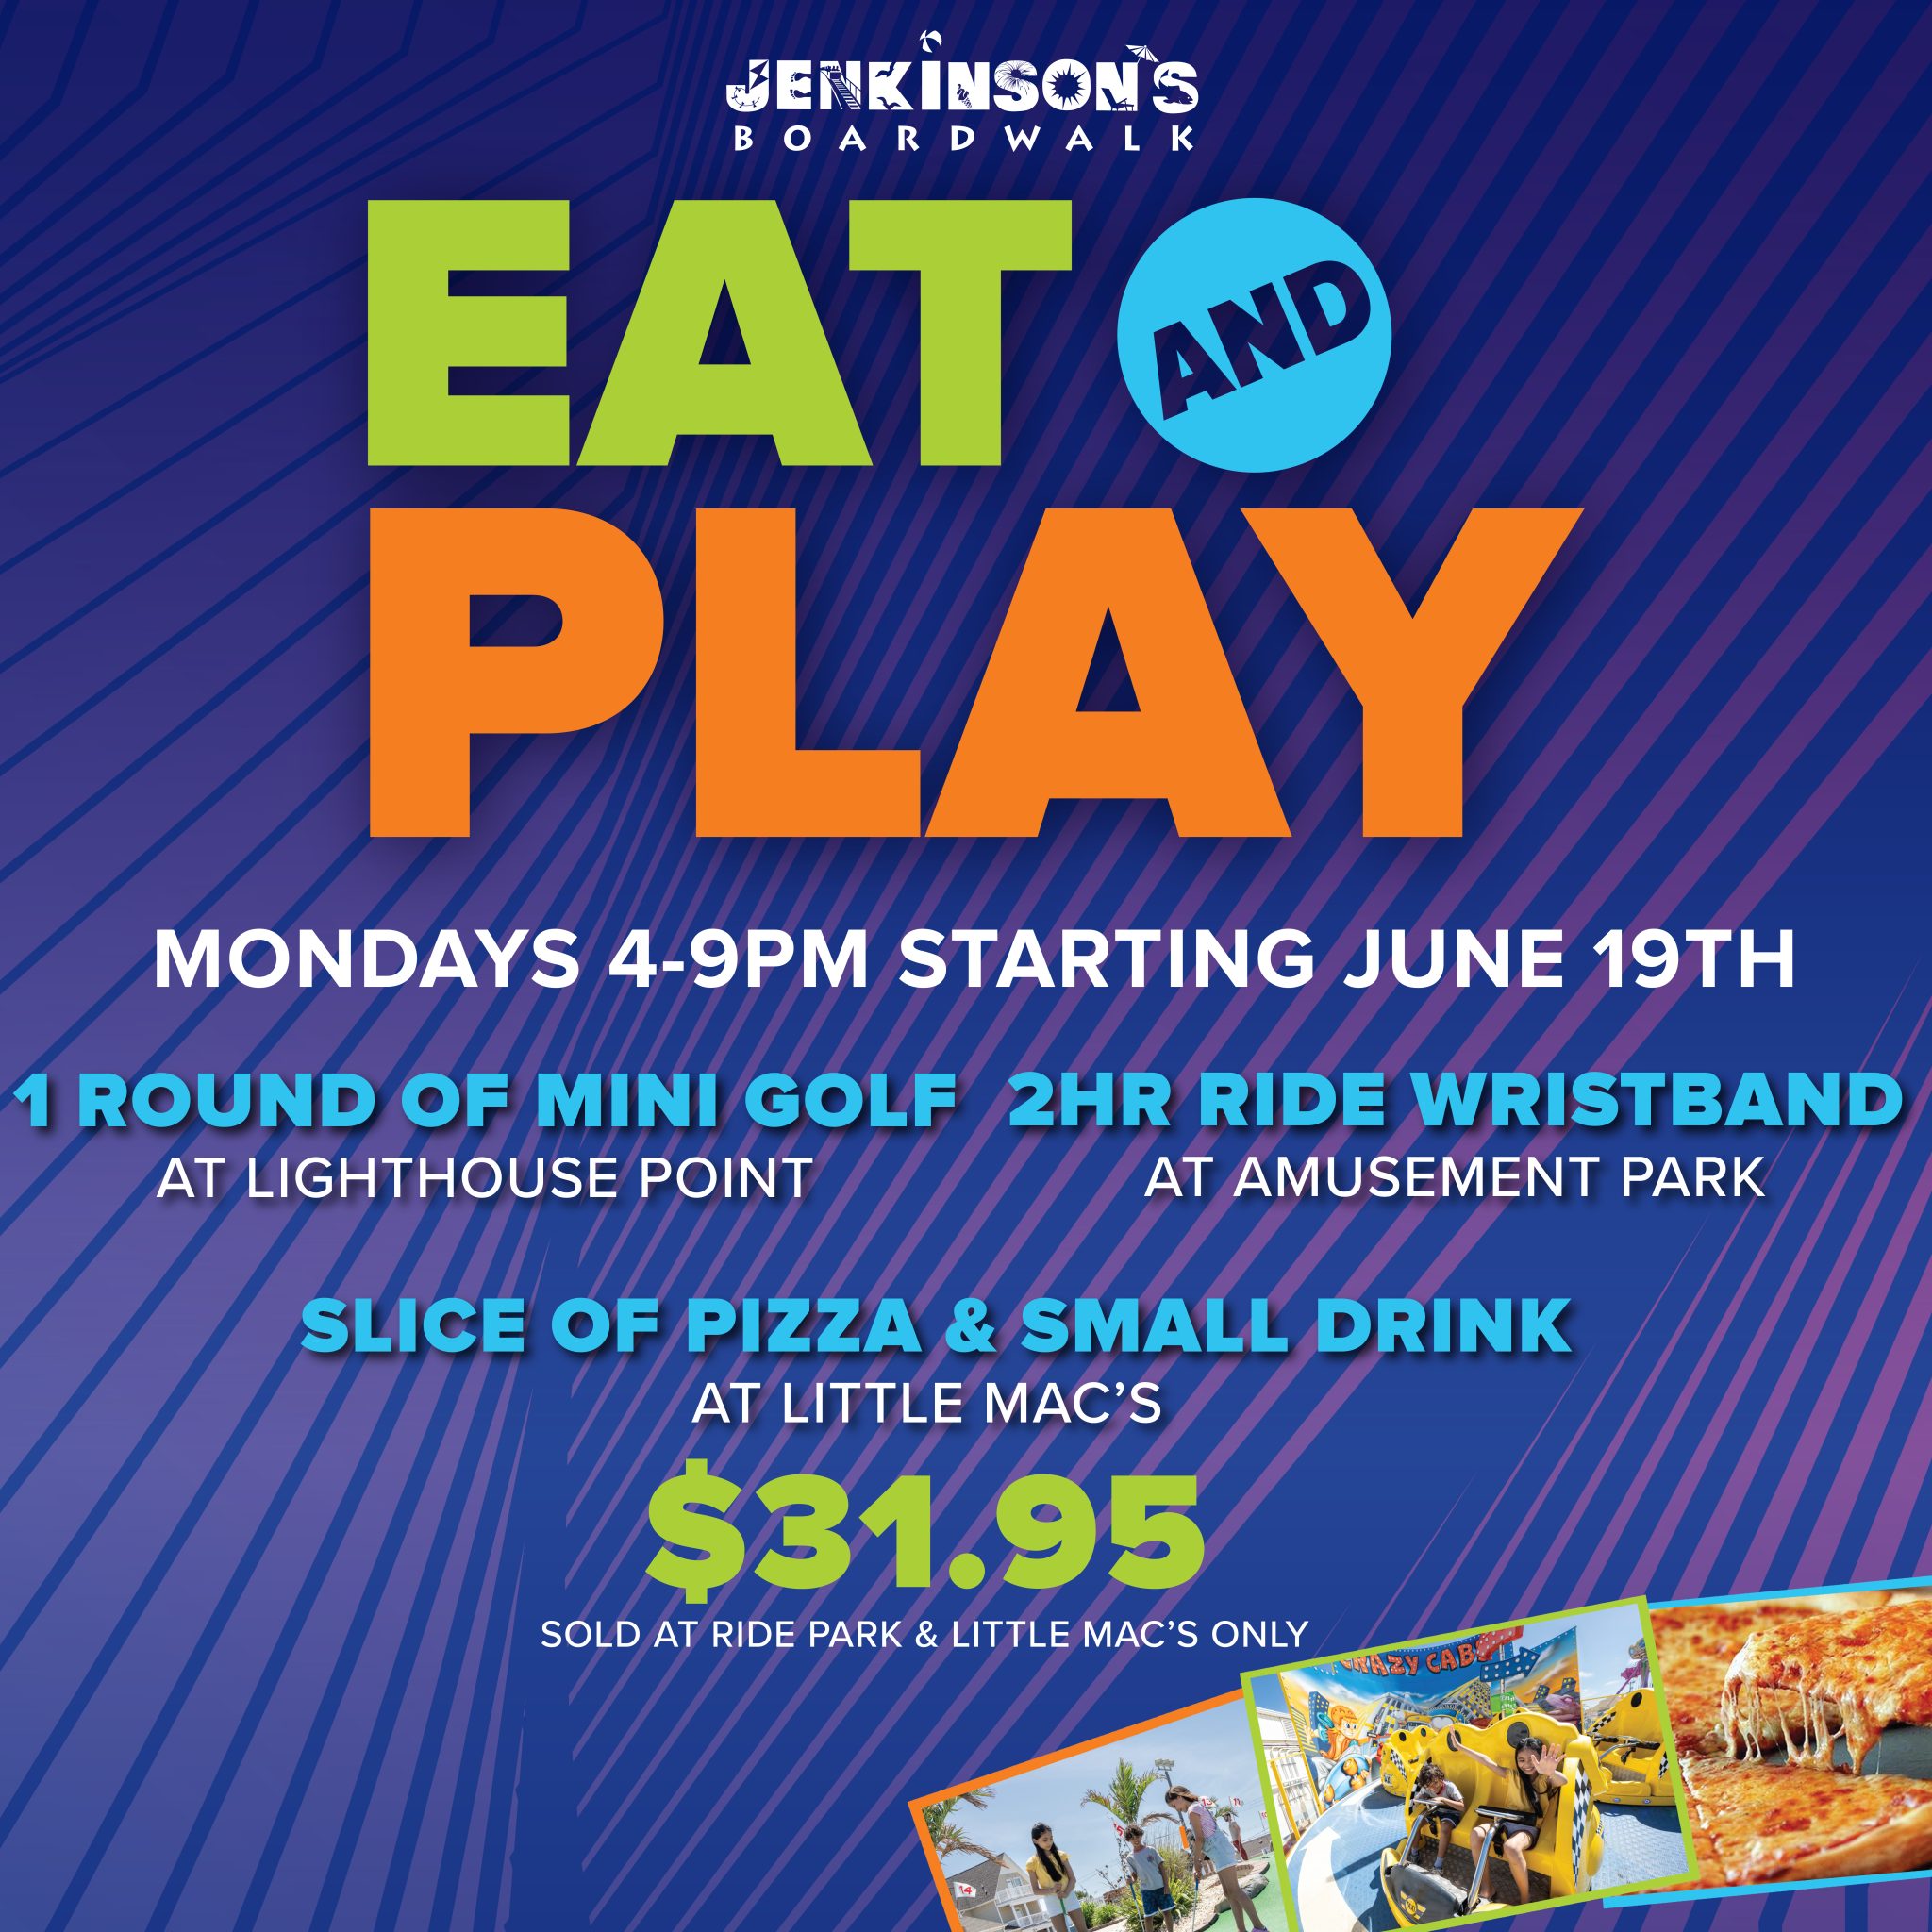 eat and play at jenkinsons boardwalk